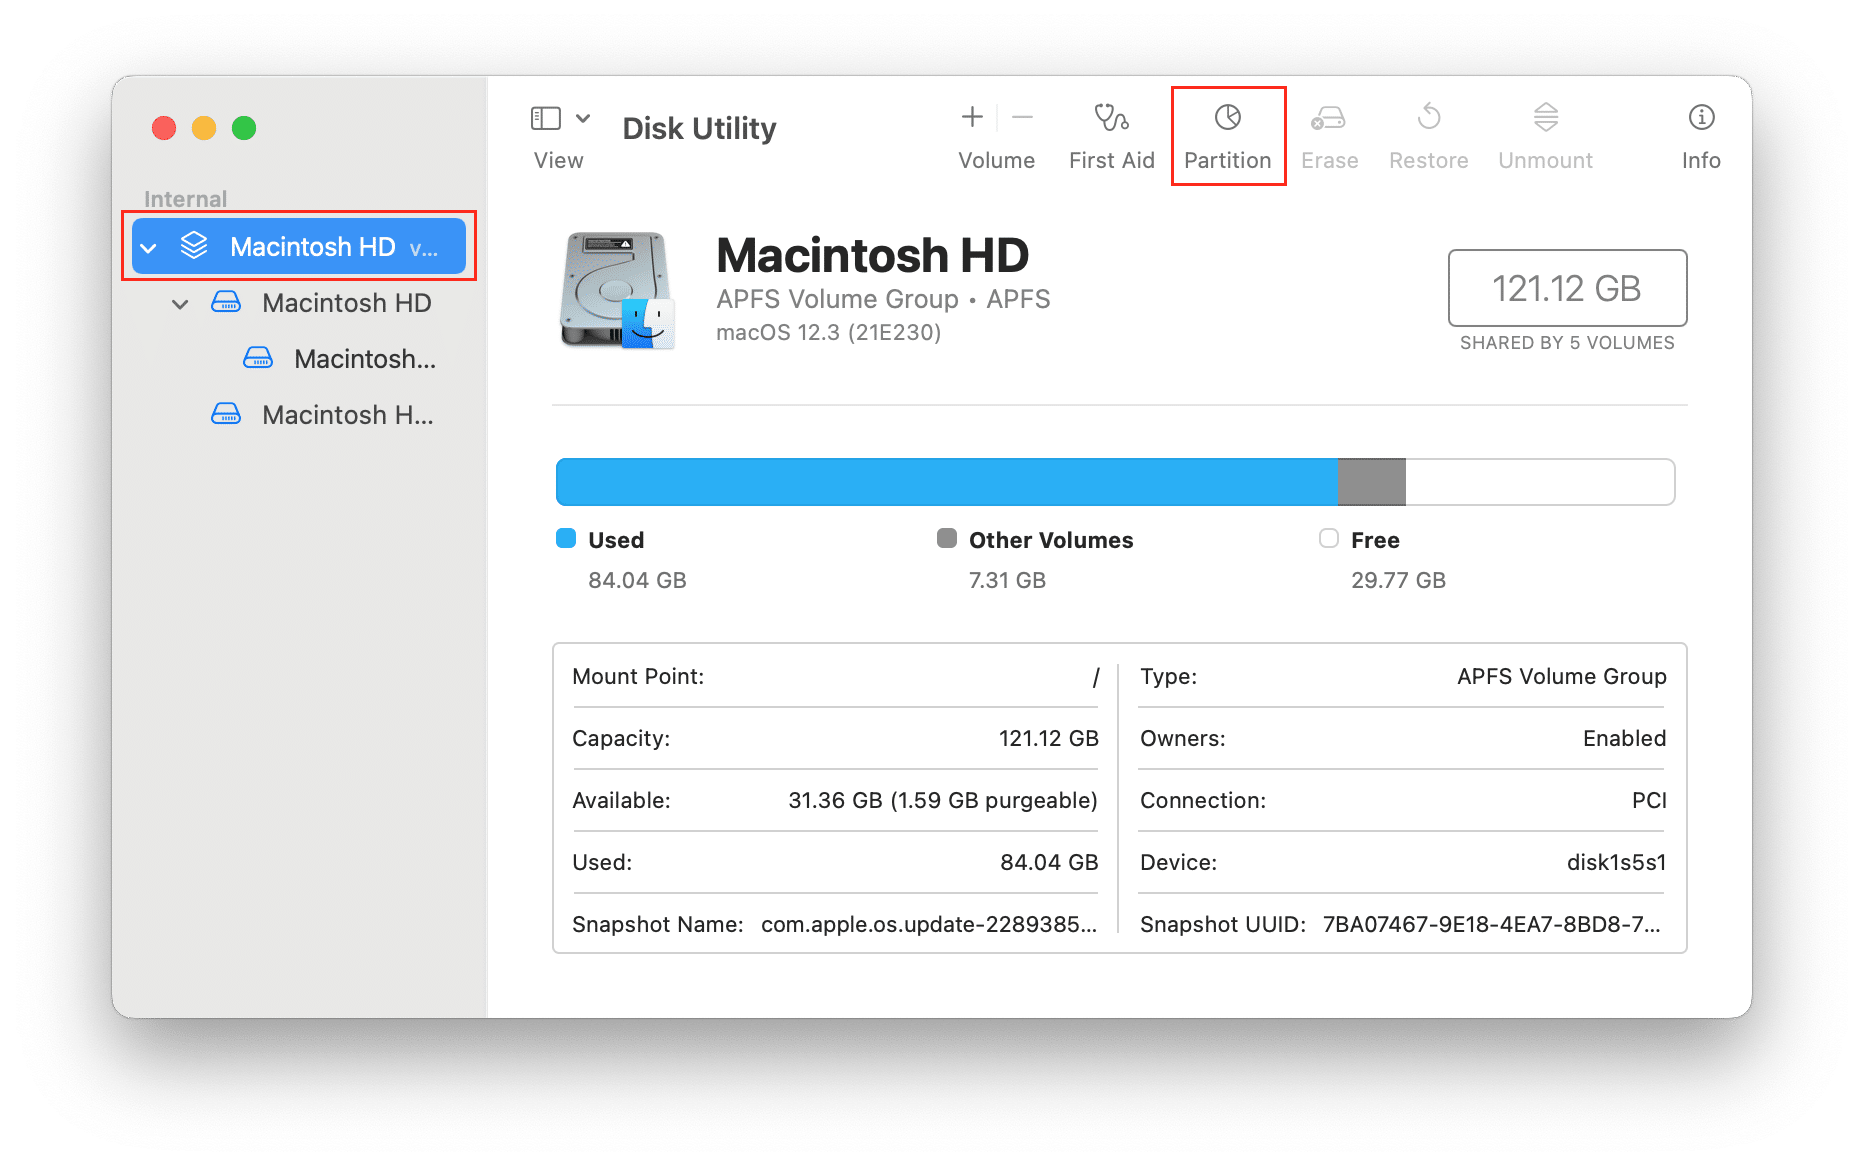 Disk Utility with Partition option highlighted